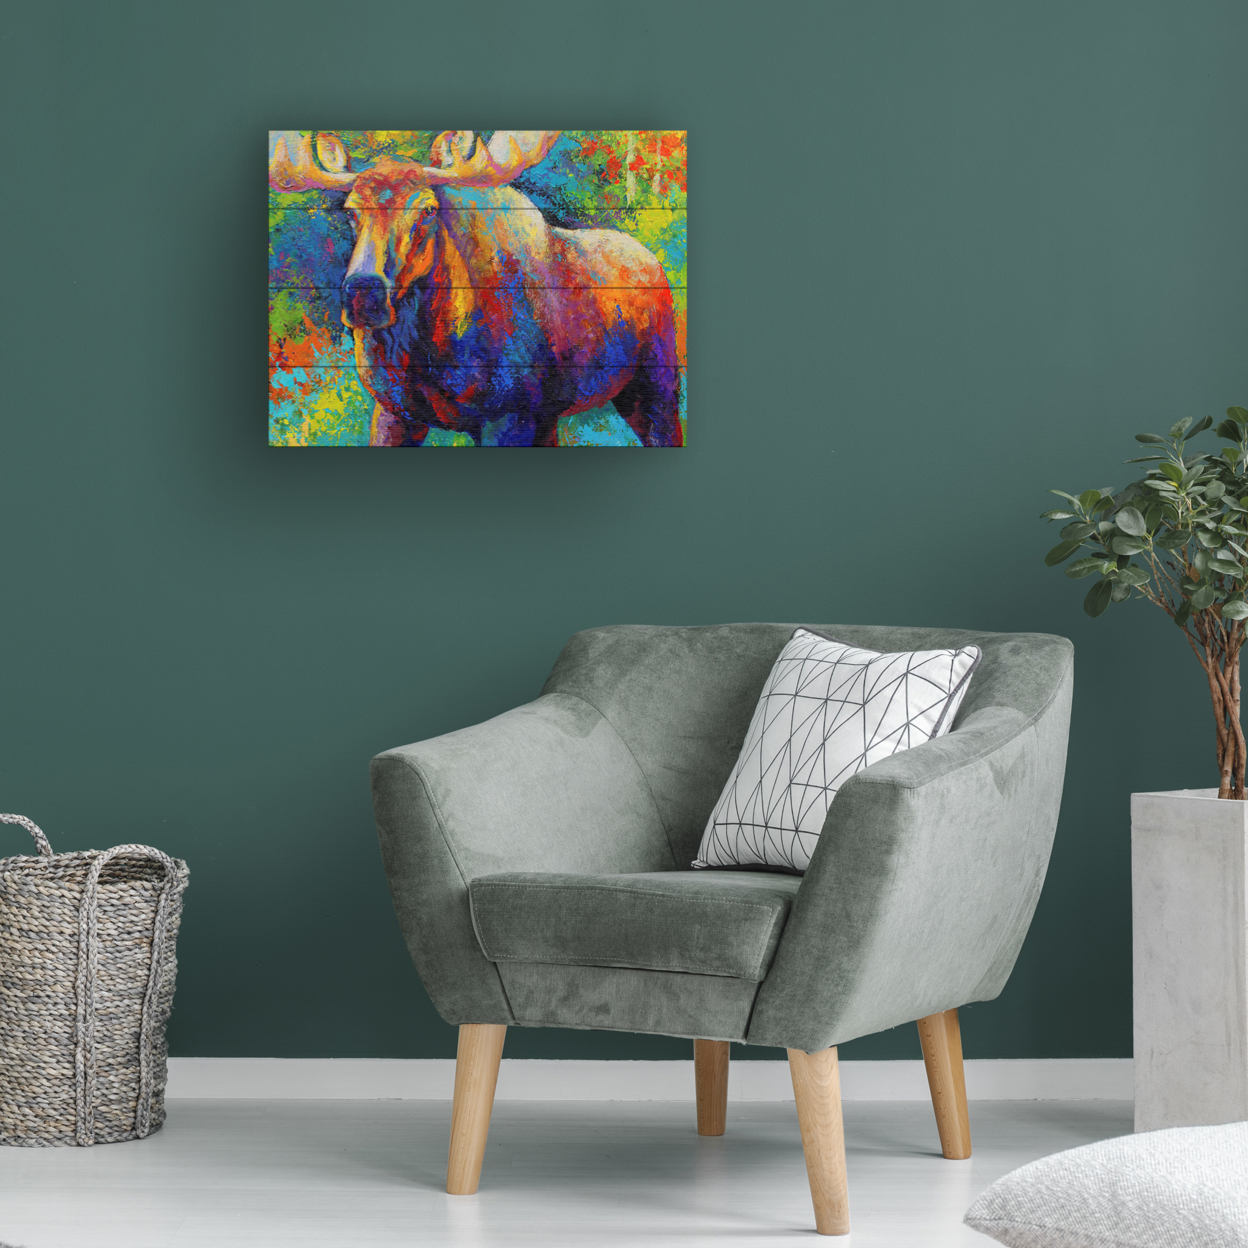 Wall Art 12 X 16 Inches Titled Bull Moose Ready To Hang Printed On Wooden Planks